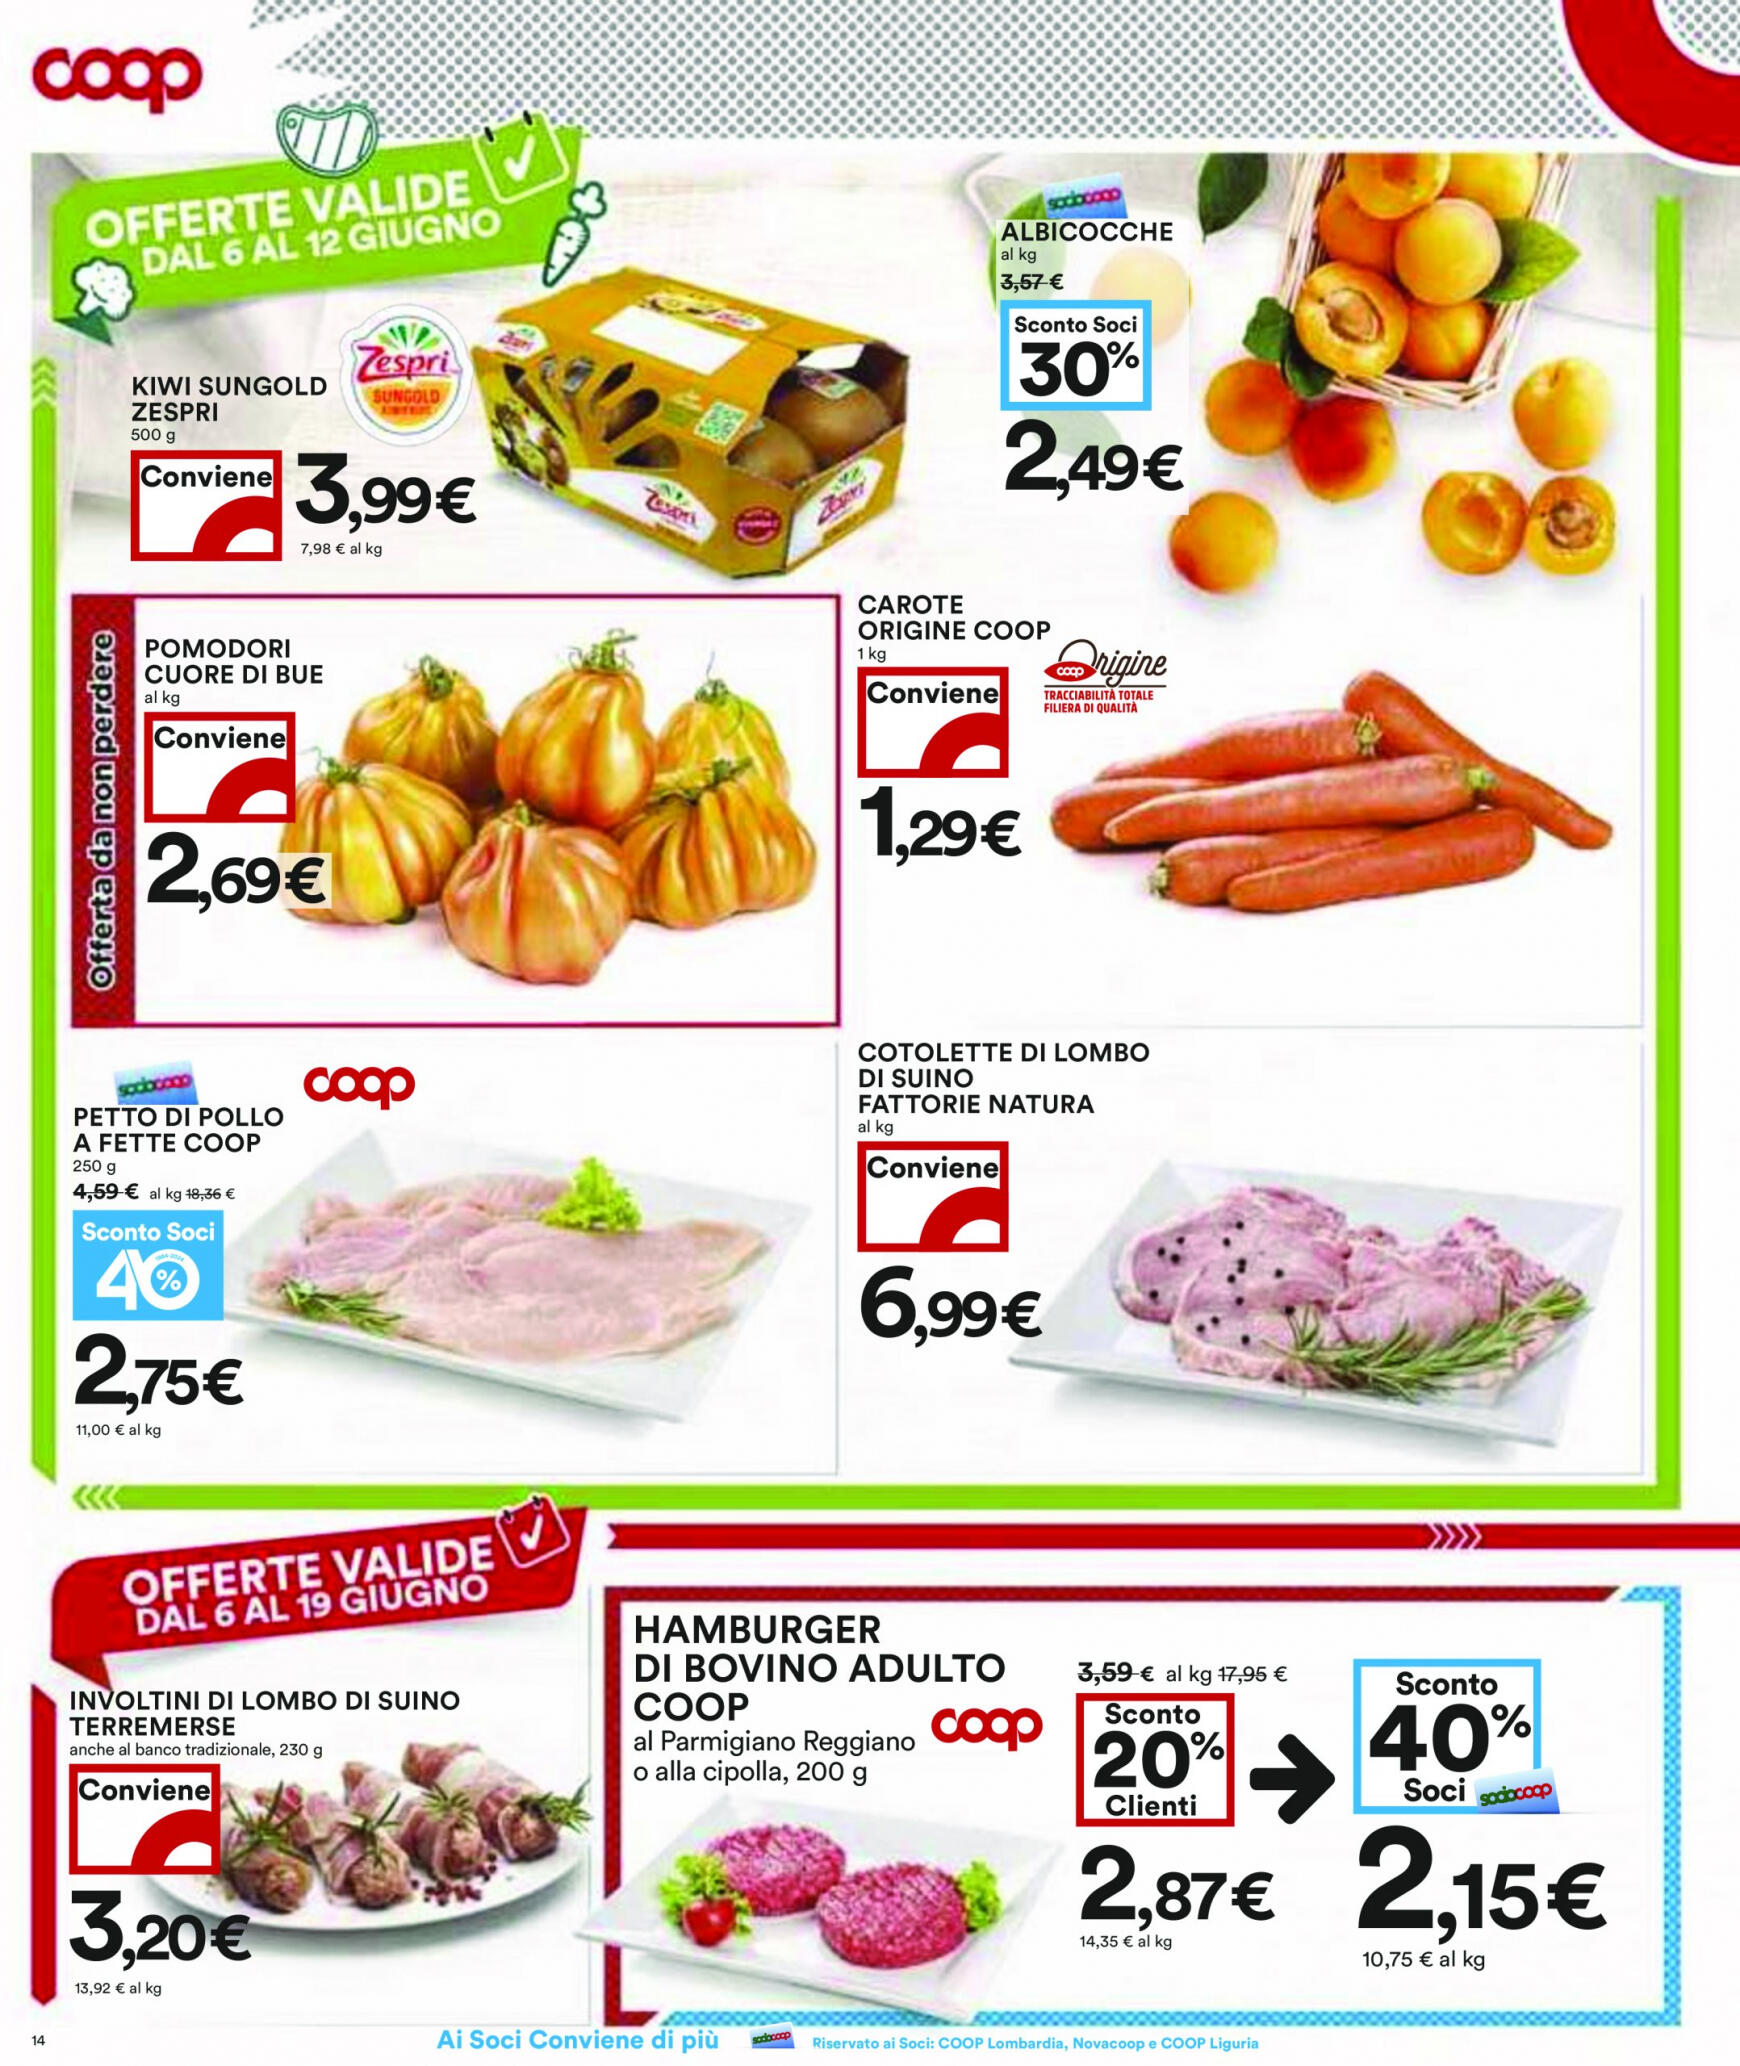 coop - Nuovo volantino Coop 10.06. - 19.06. - page: 14